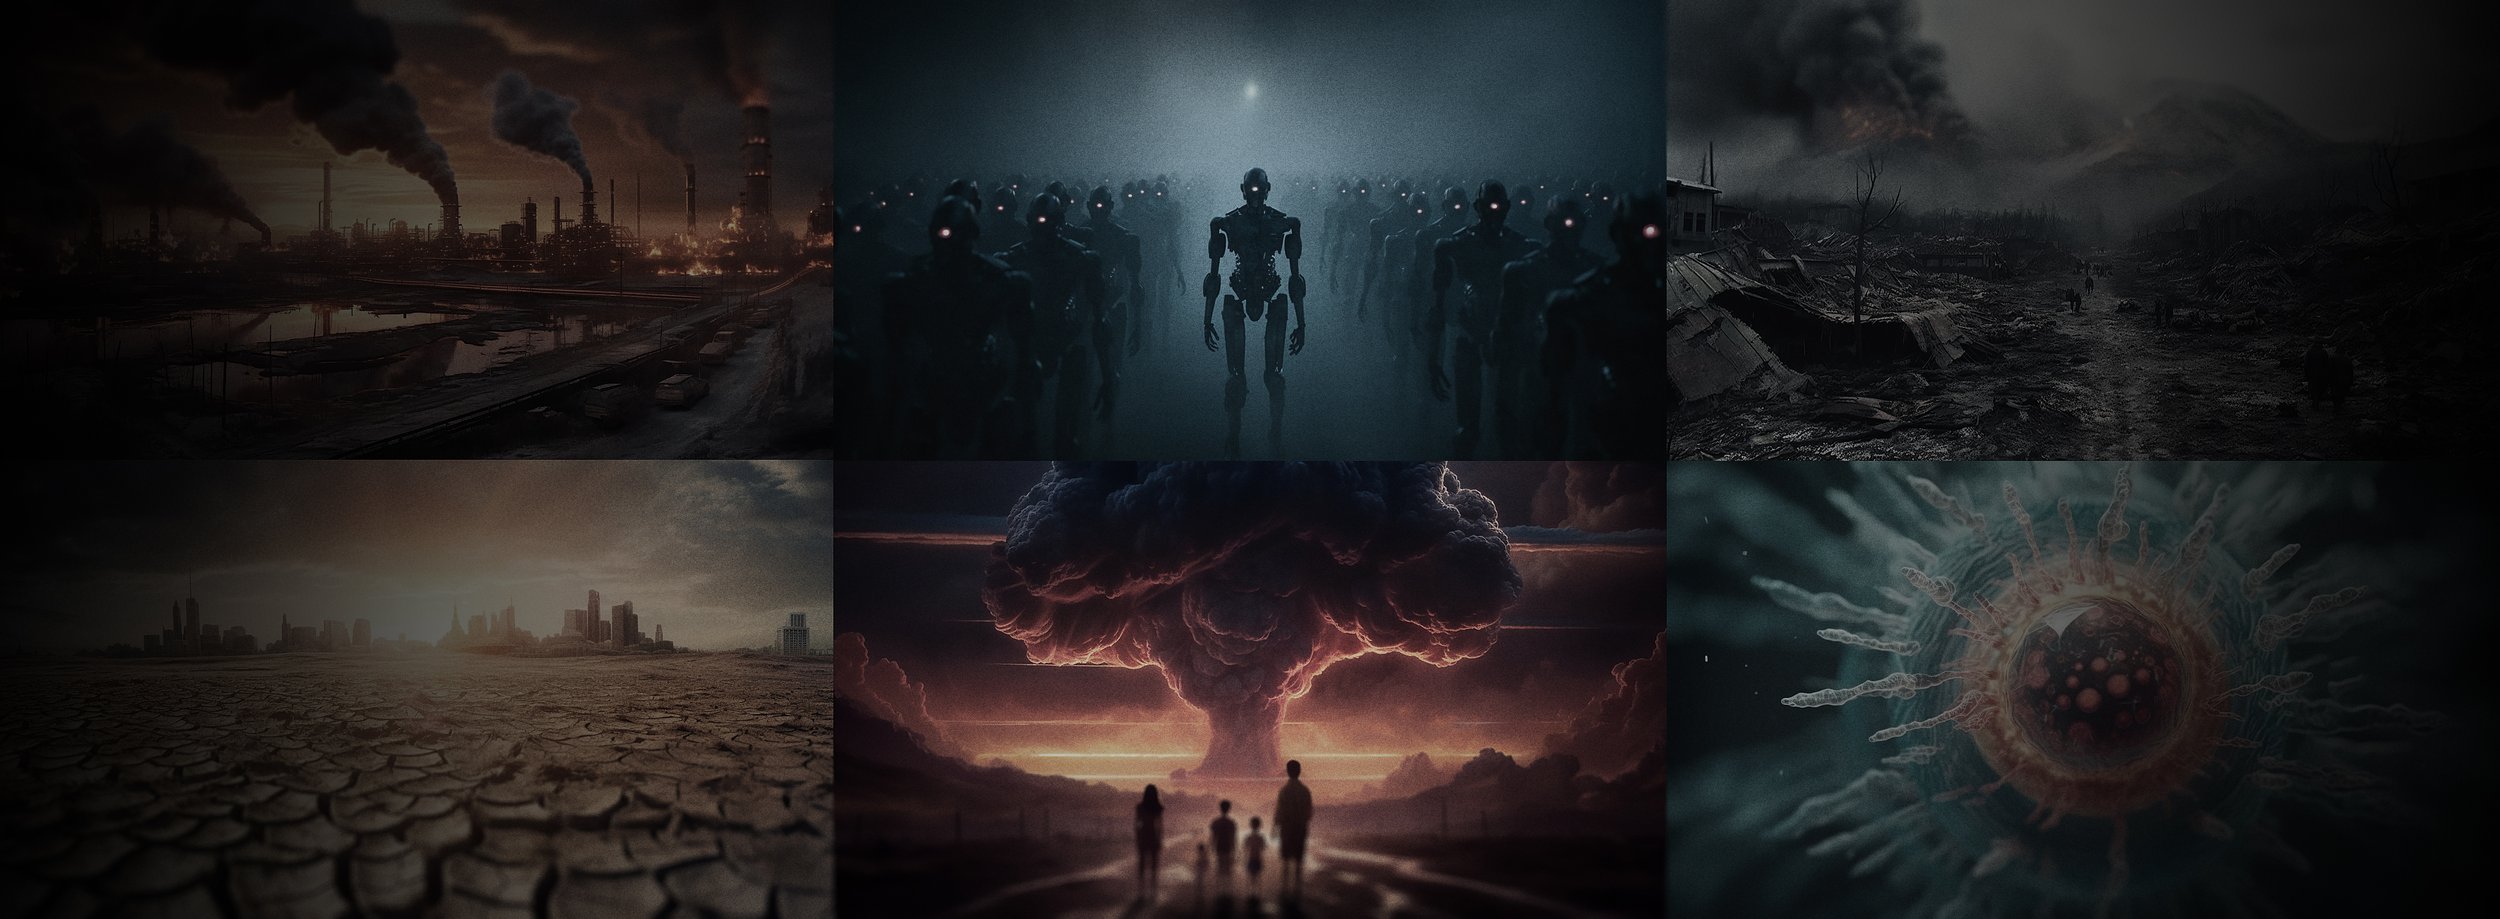 Alien Endgame Examines the Extraterrestrial Threats to Our Planet